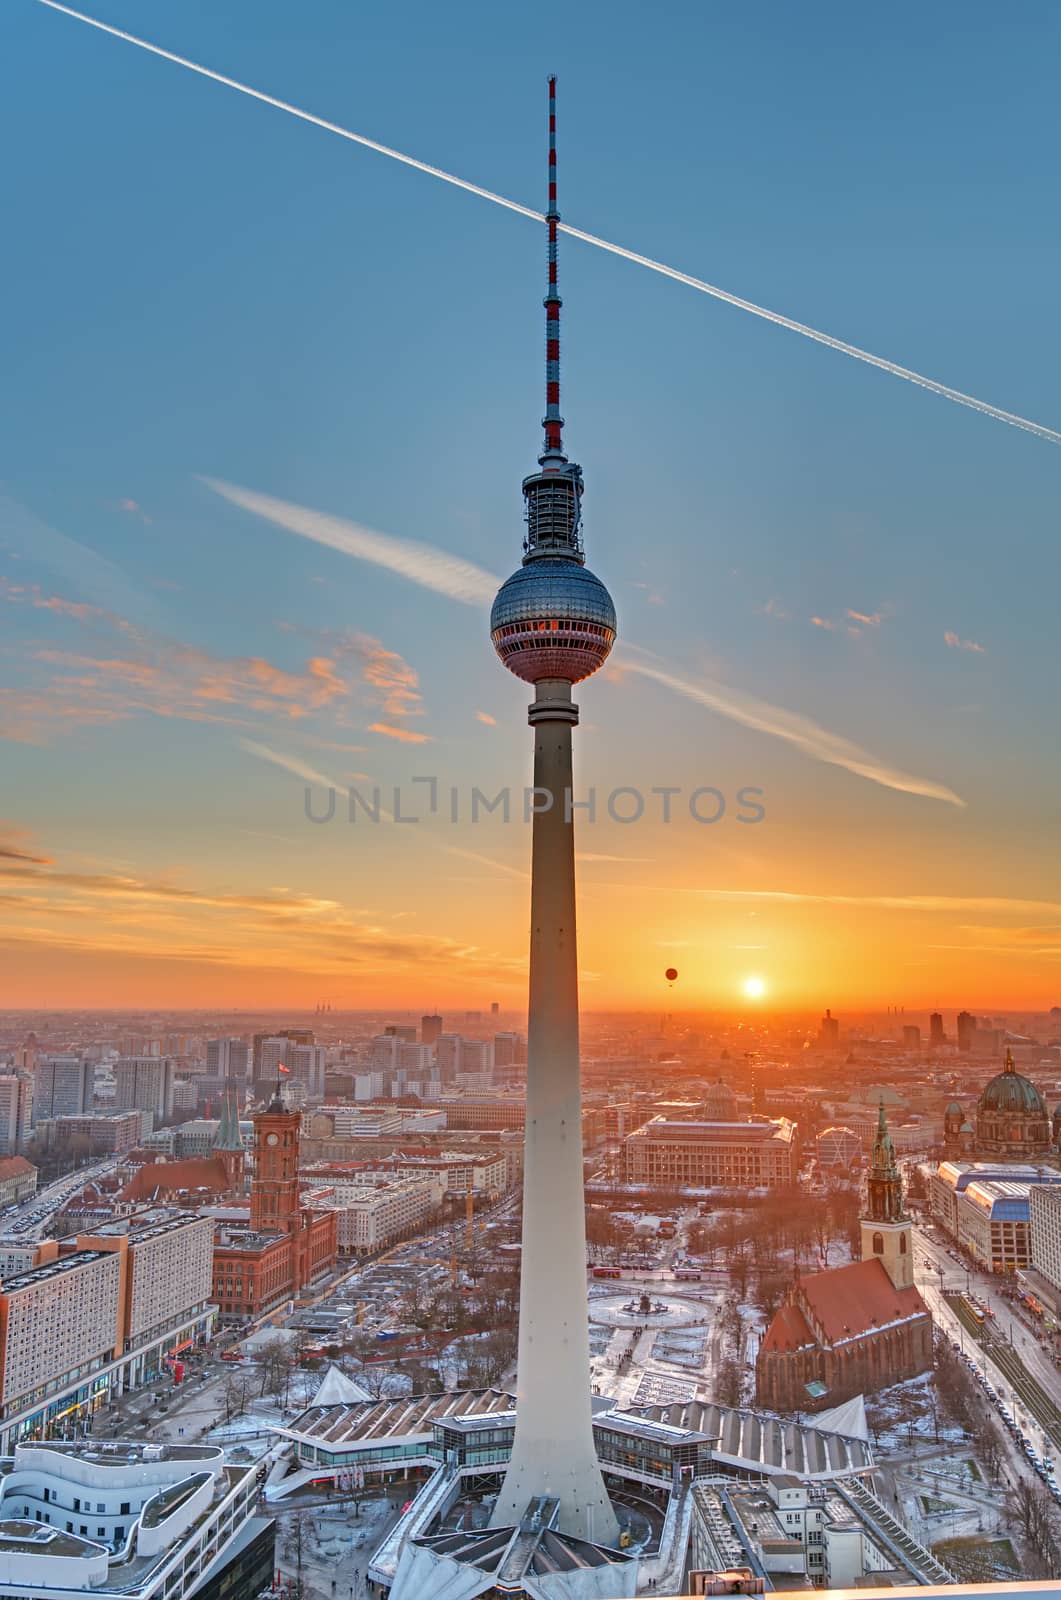 The Television tower in Berlin at sunset